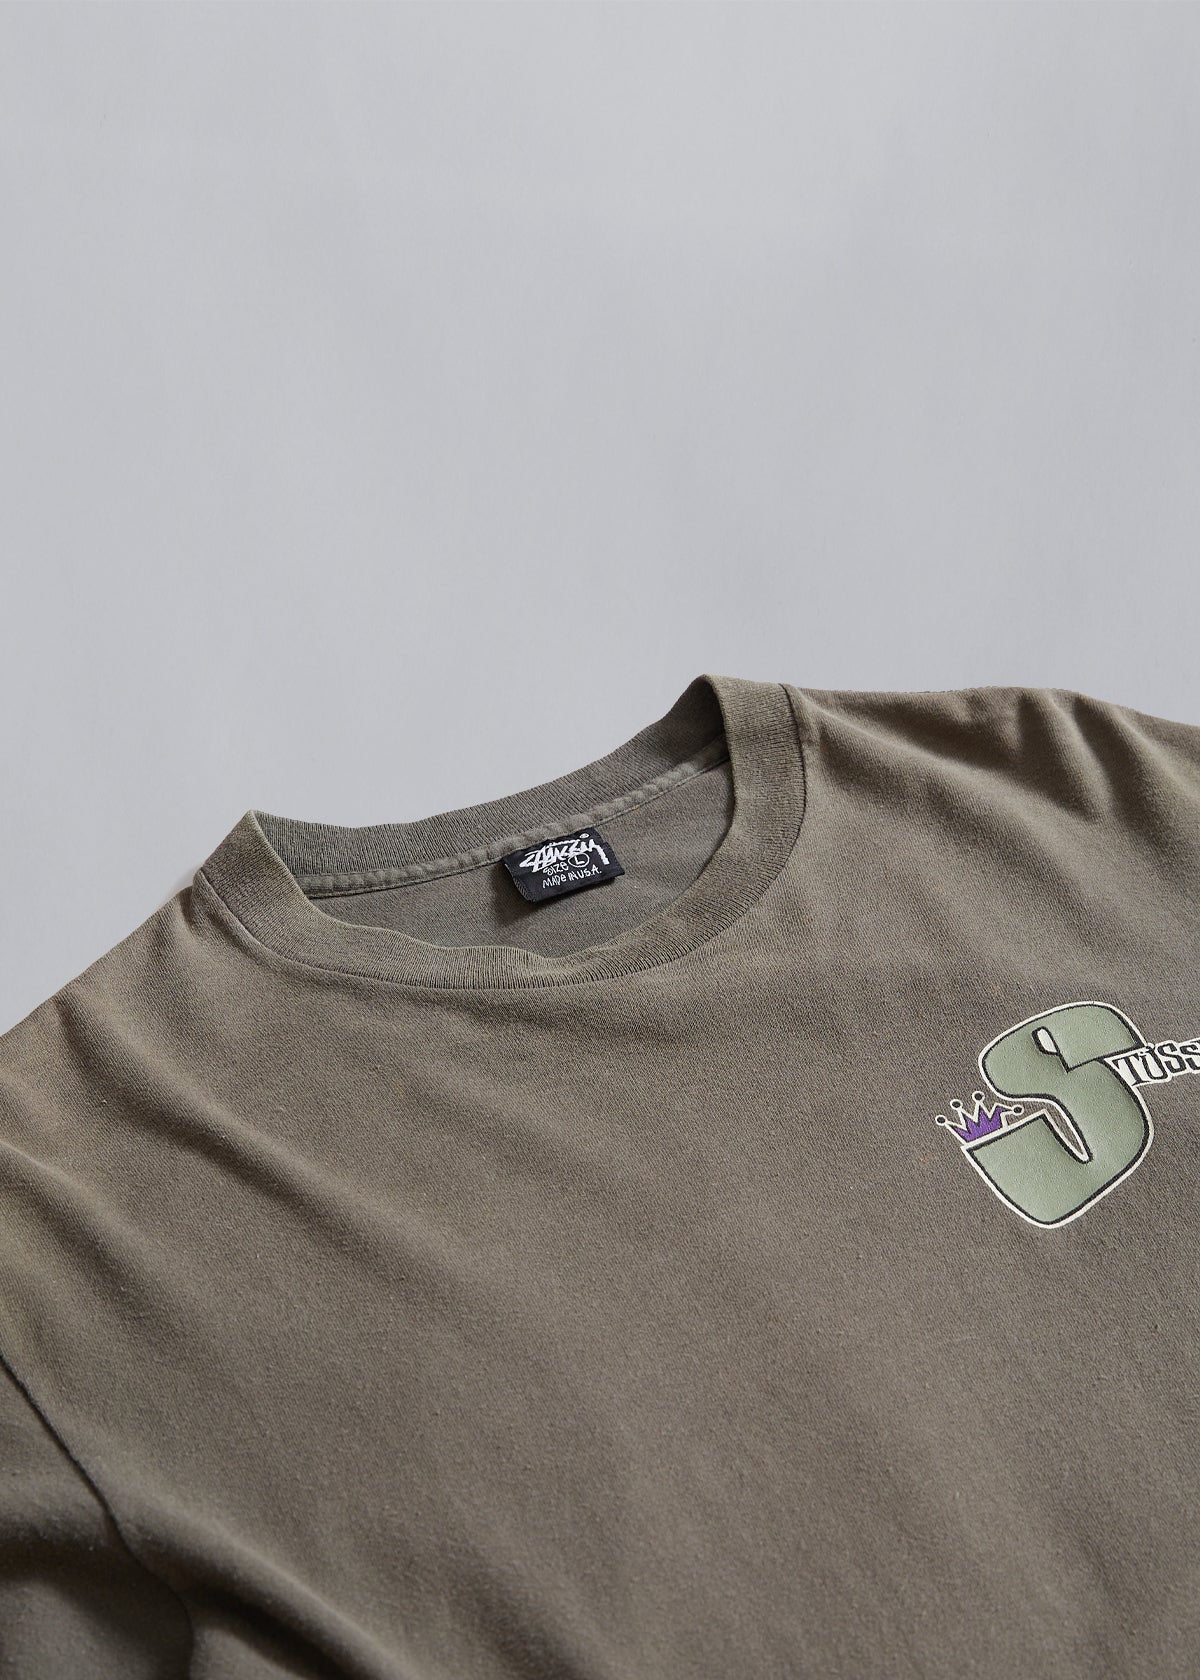 Olive Fat S Tee 1993 - Large